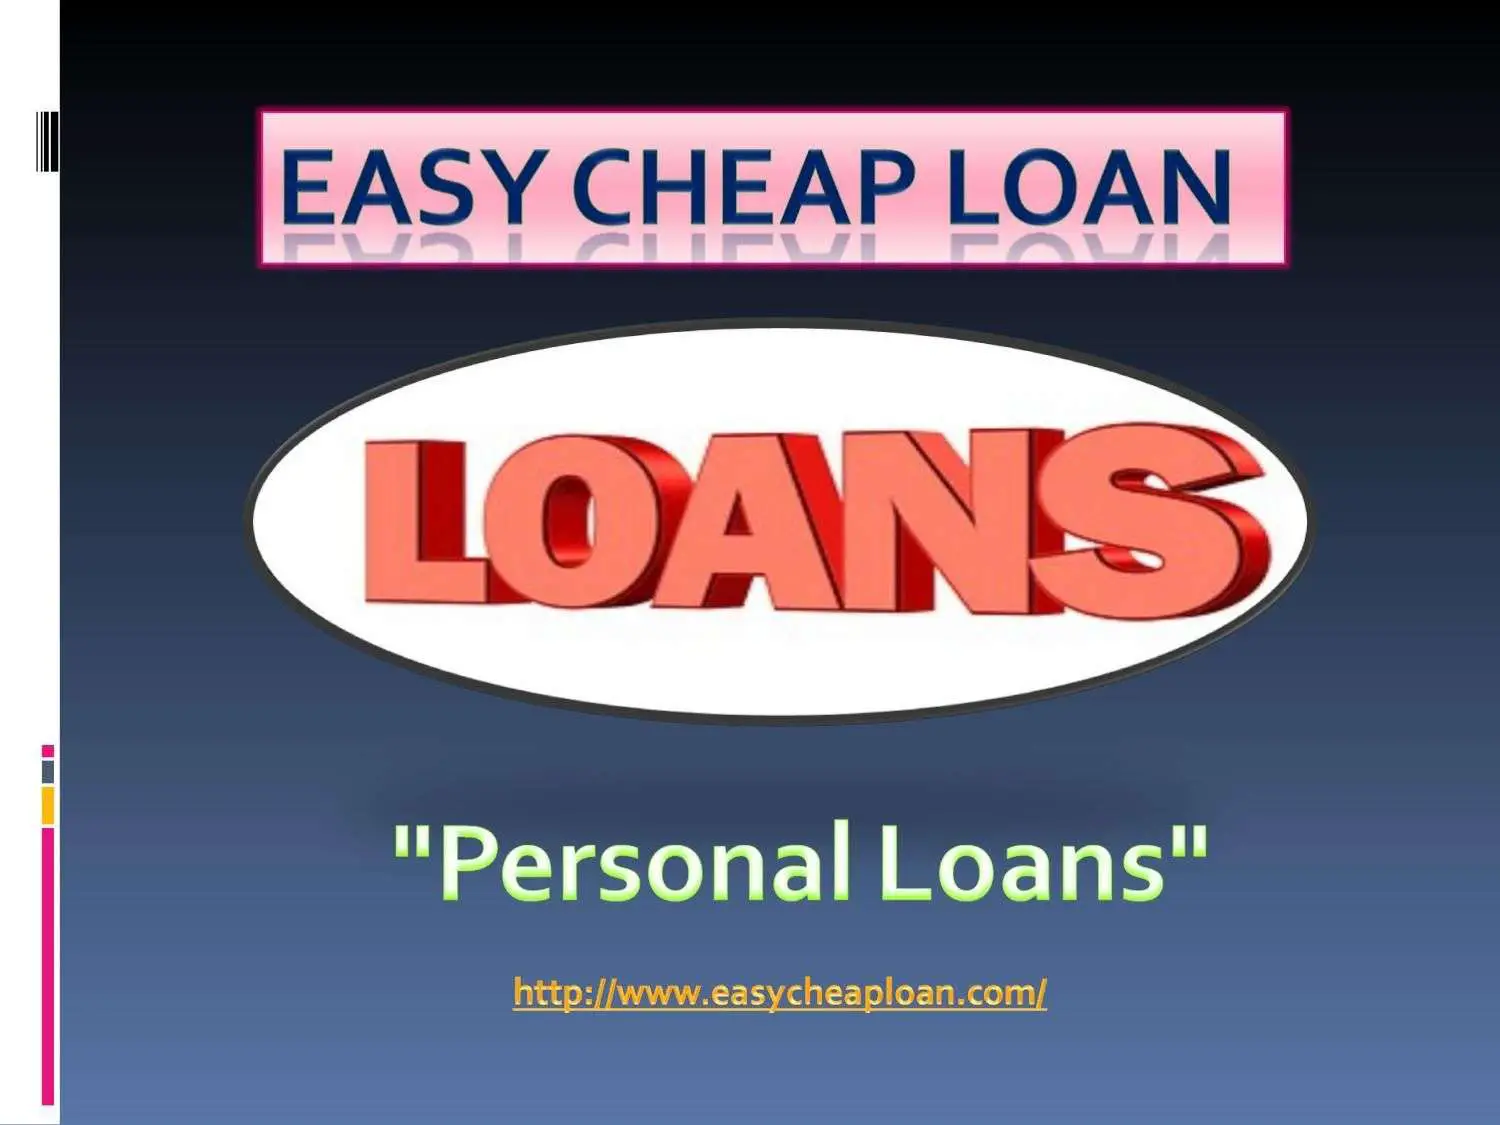 Easy Cheap Loan introducing new offers on Personal Loans in the UK at ...